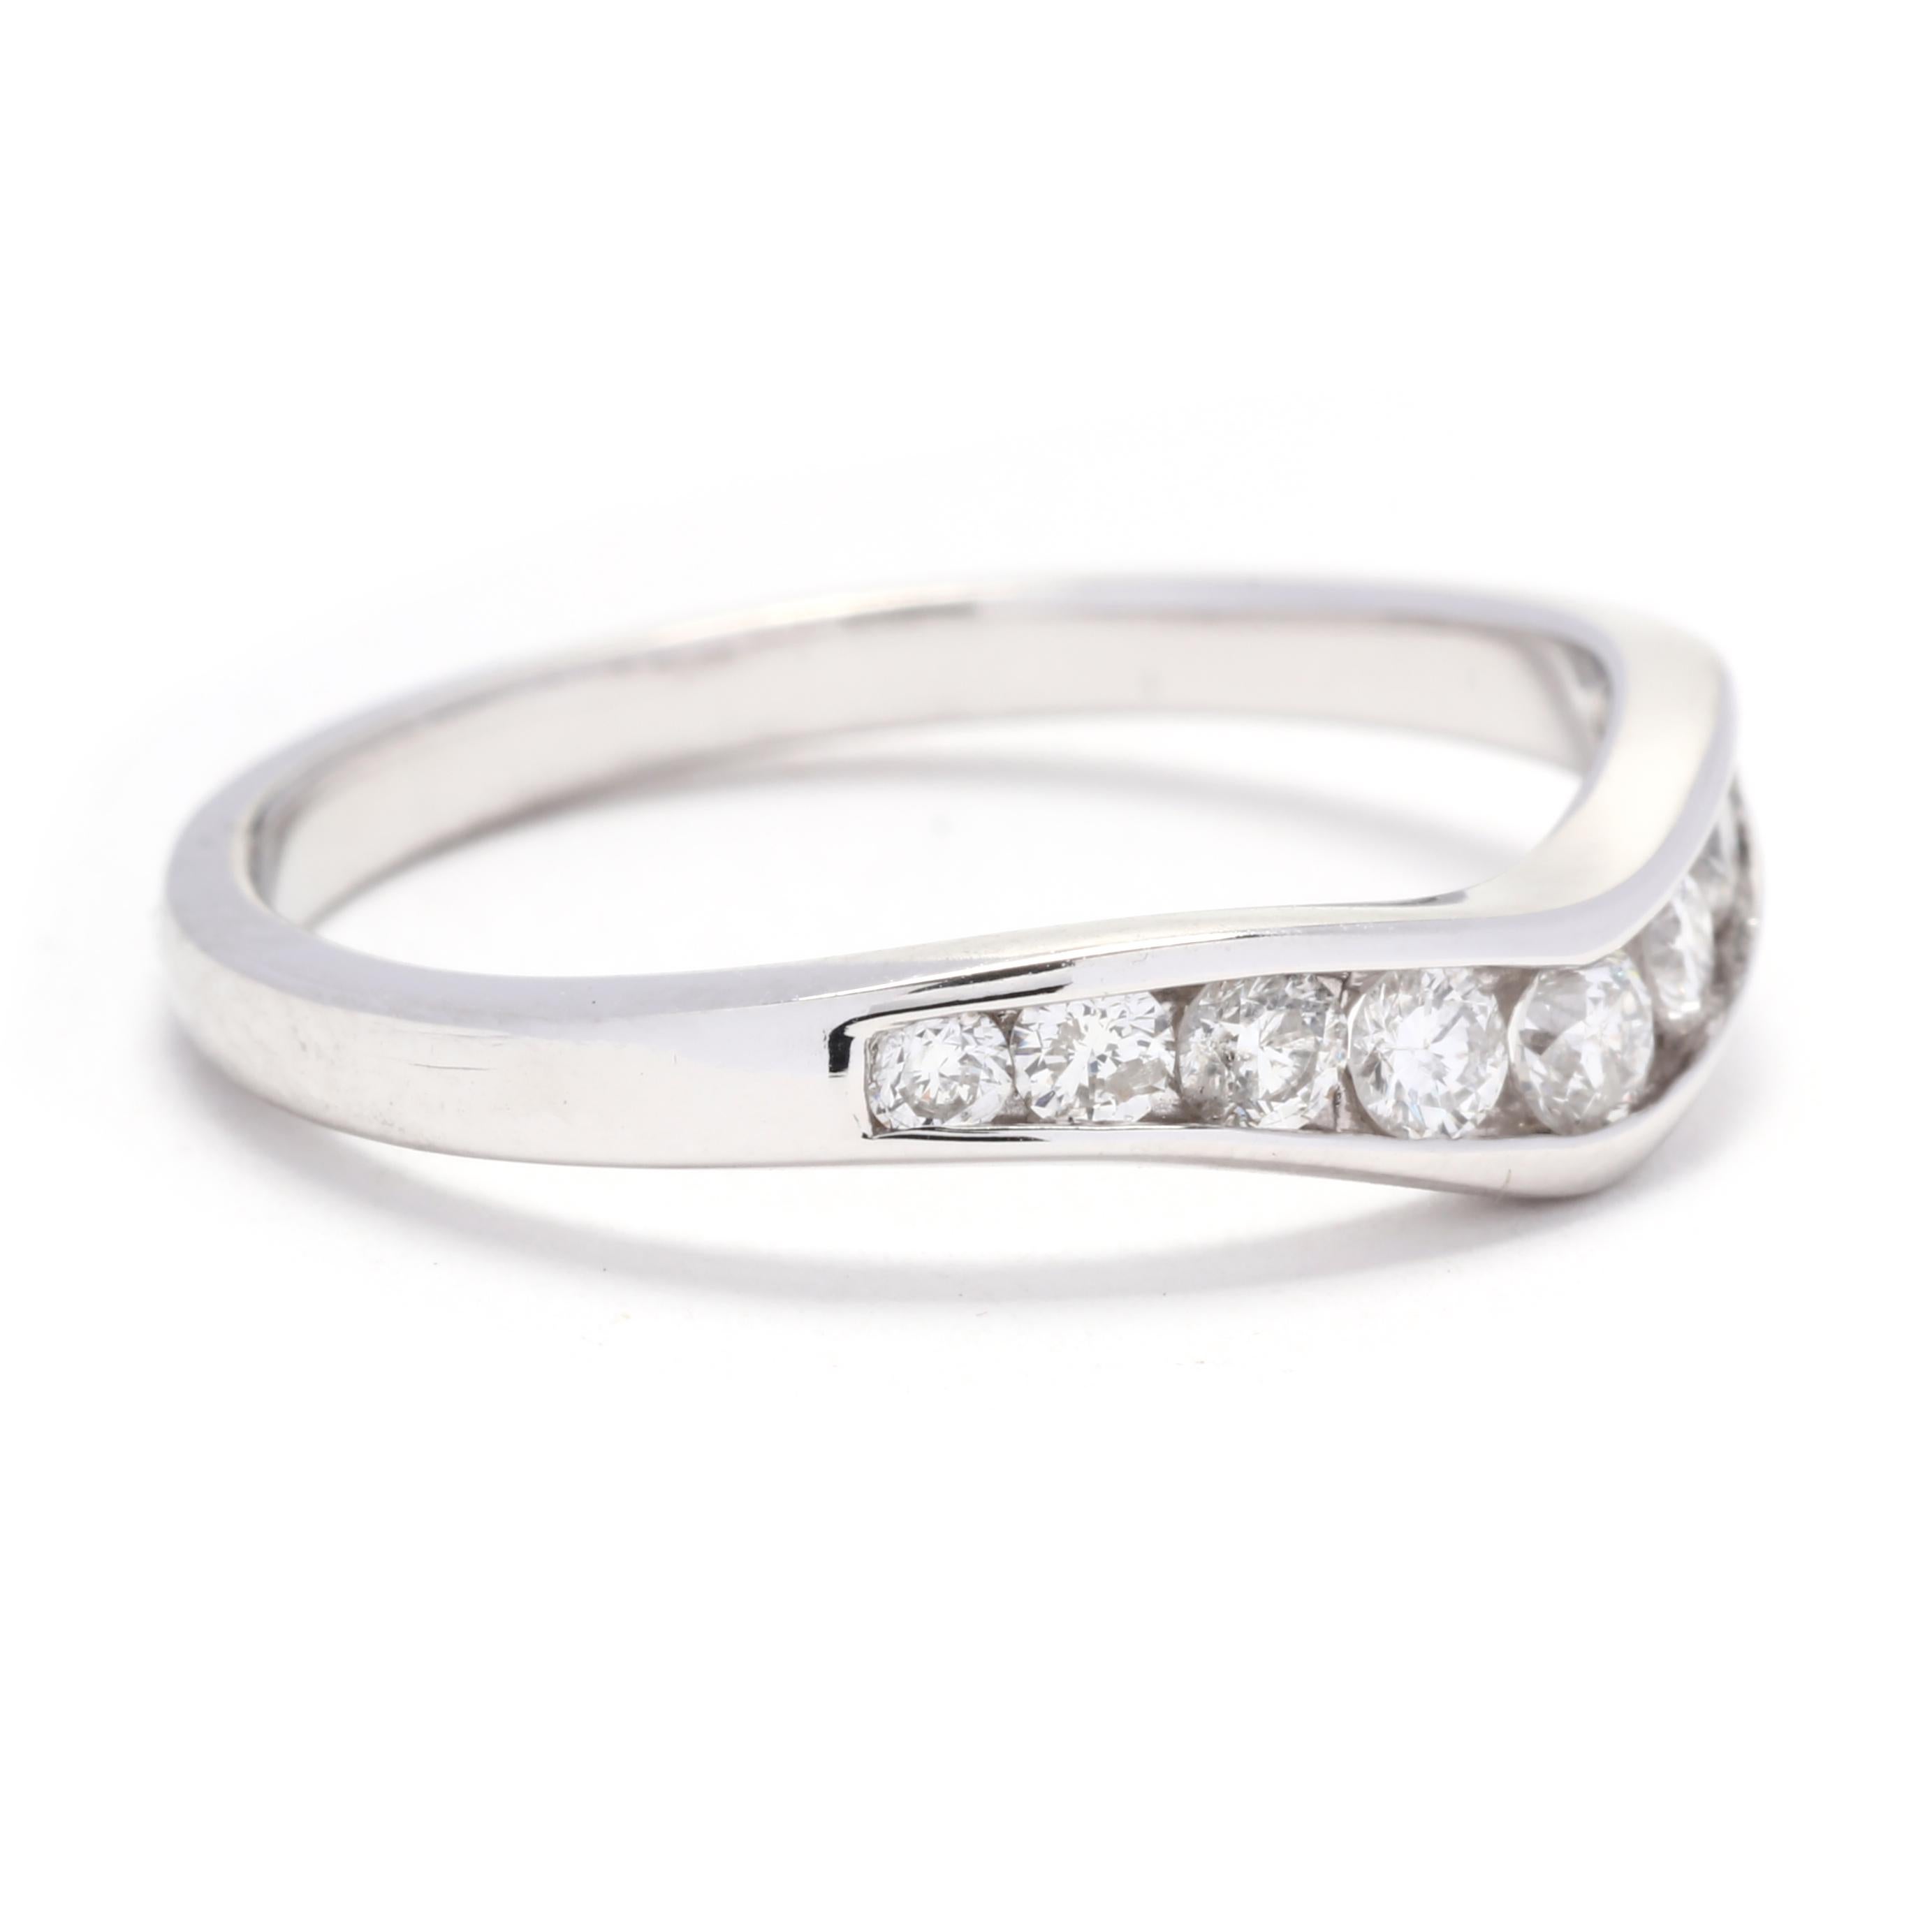 Enhance the beauty of your engagement ring with this stunning 0.40ctw curved diamond wedding band. Made in 14K white gold, this ring features a gently curved design that hugs your engagement ring perfectly. It can also be worn on its own as a